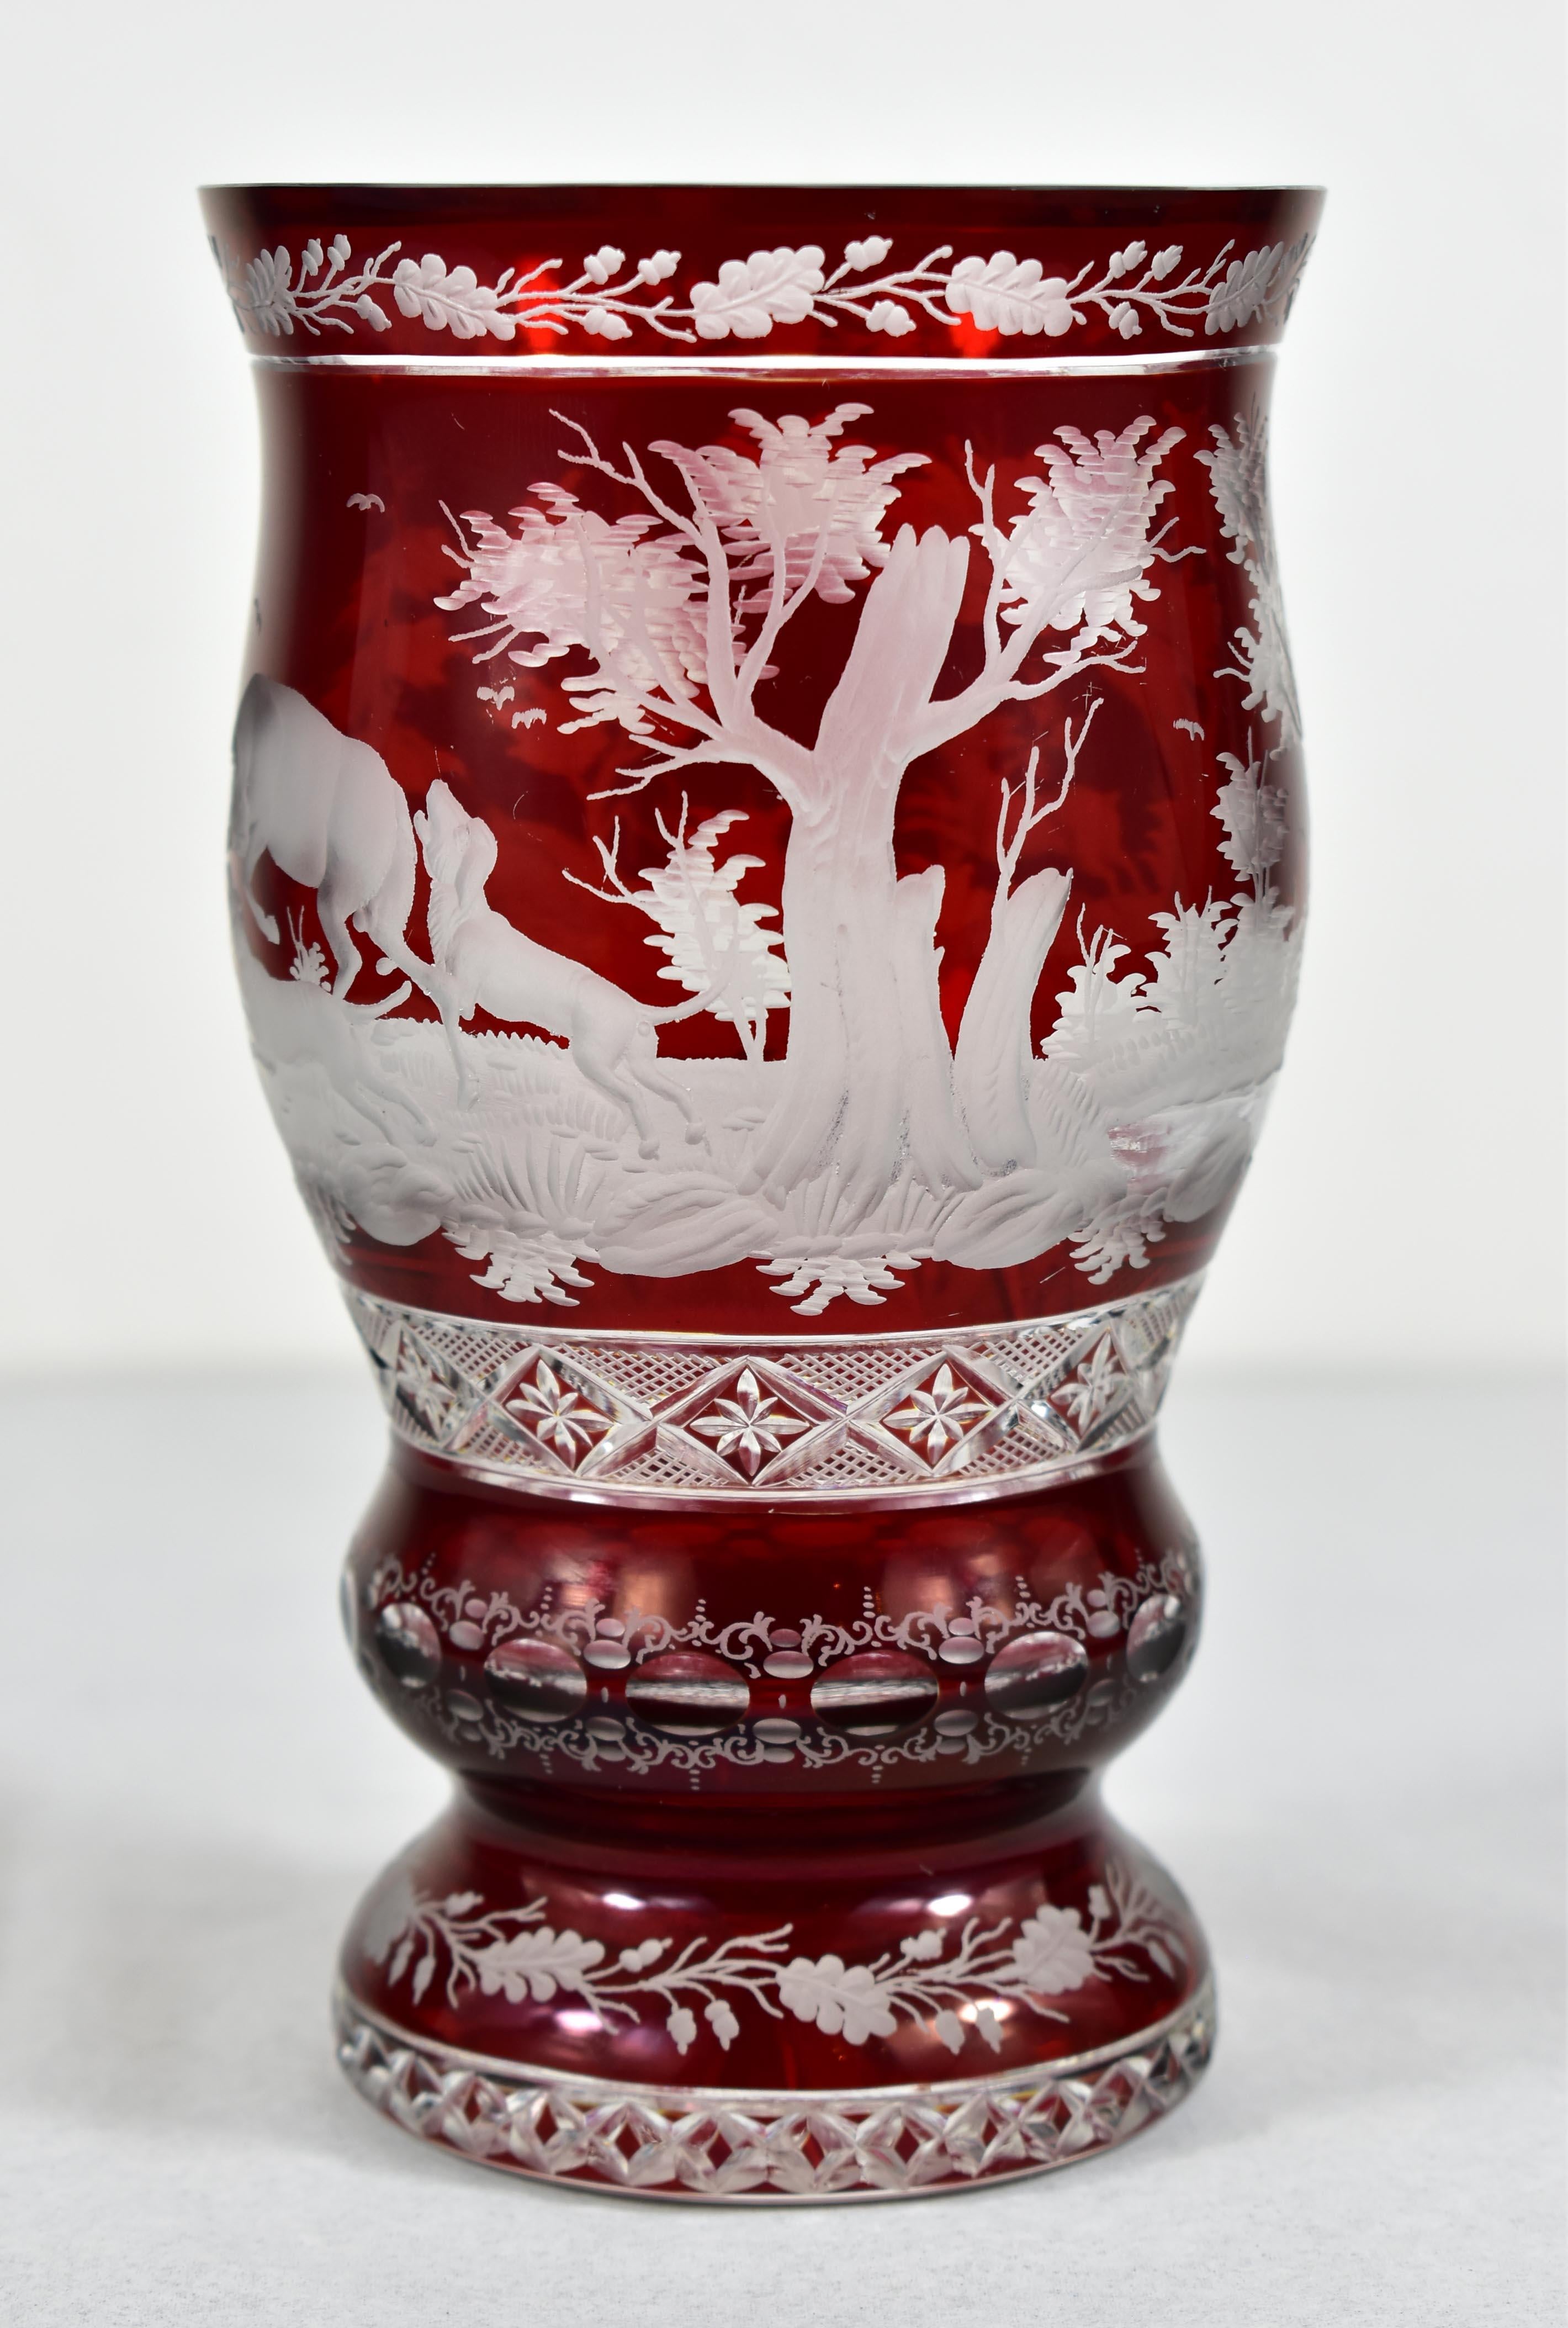 Hand-Crafted Ruby Glass Goblet - Hunting motif - Bohemian Glass - 19-20 century